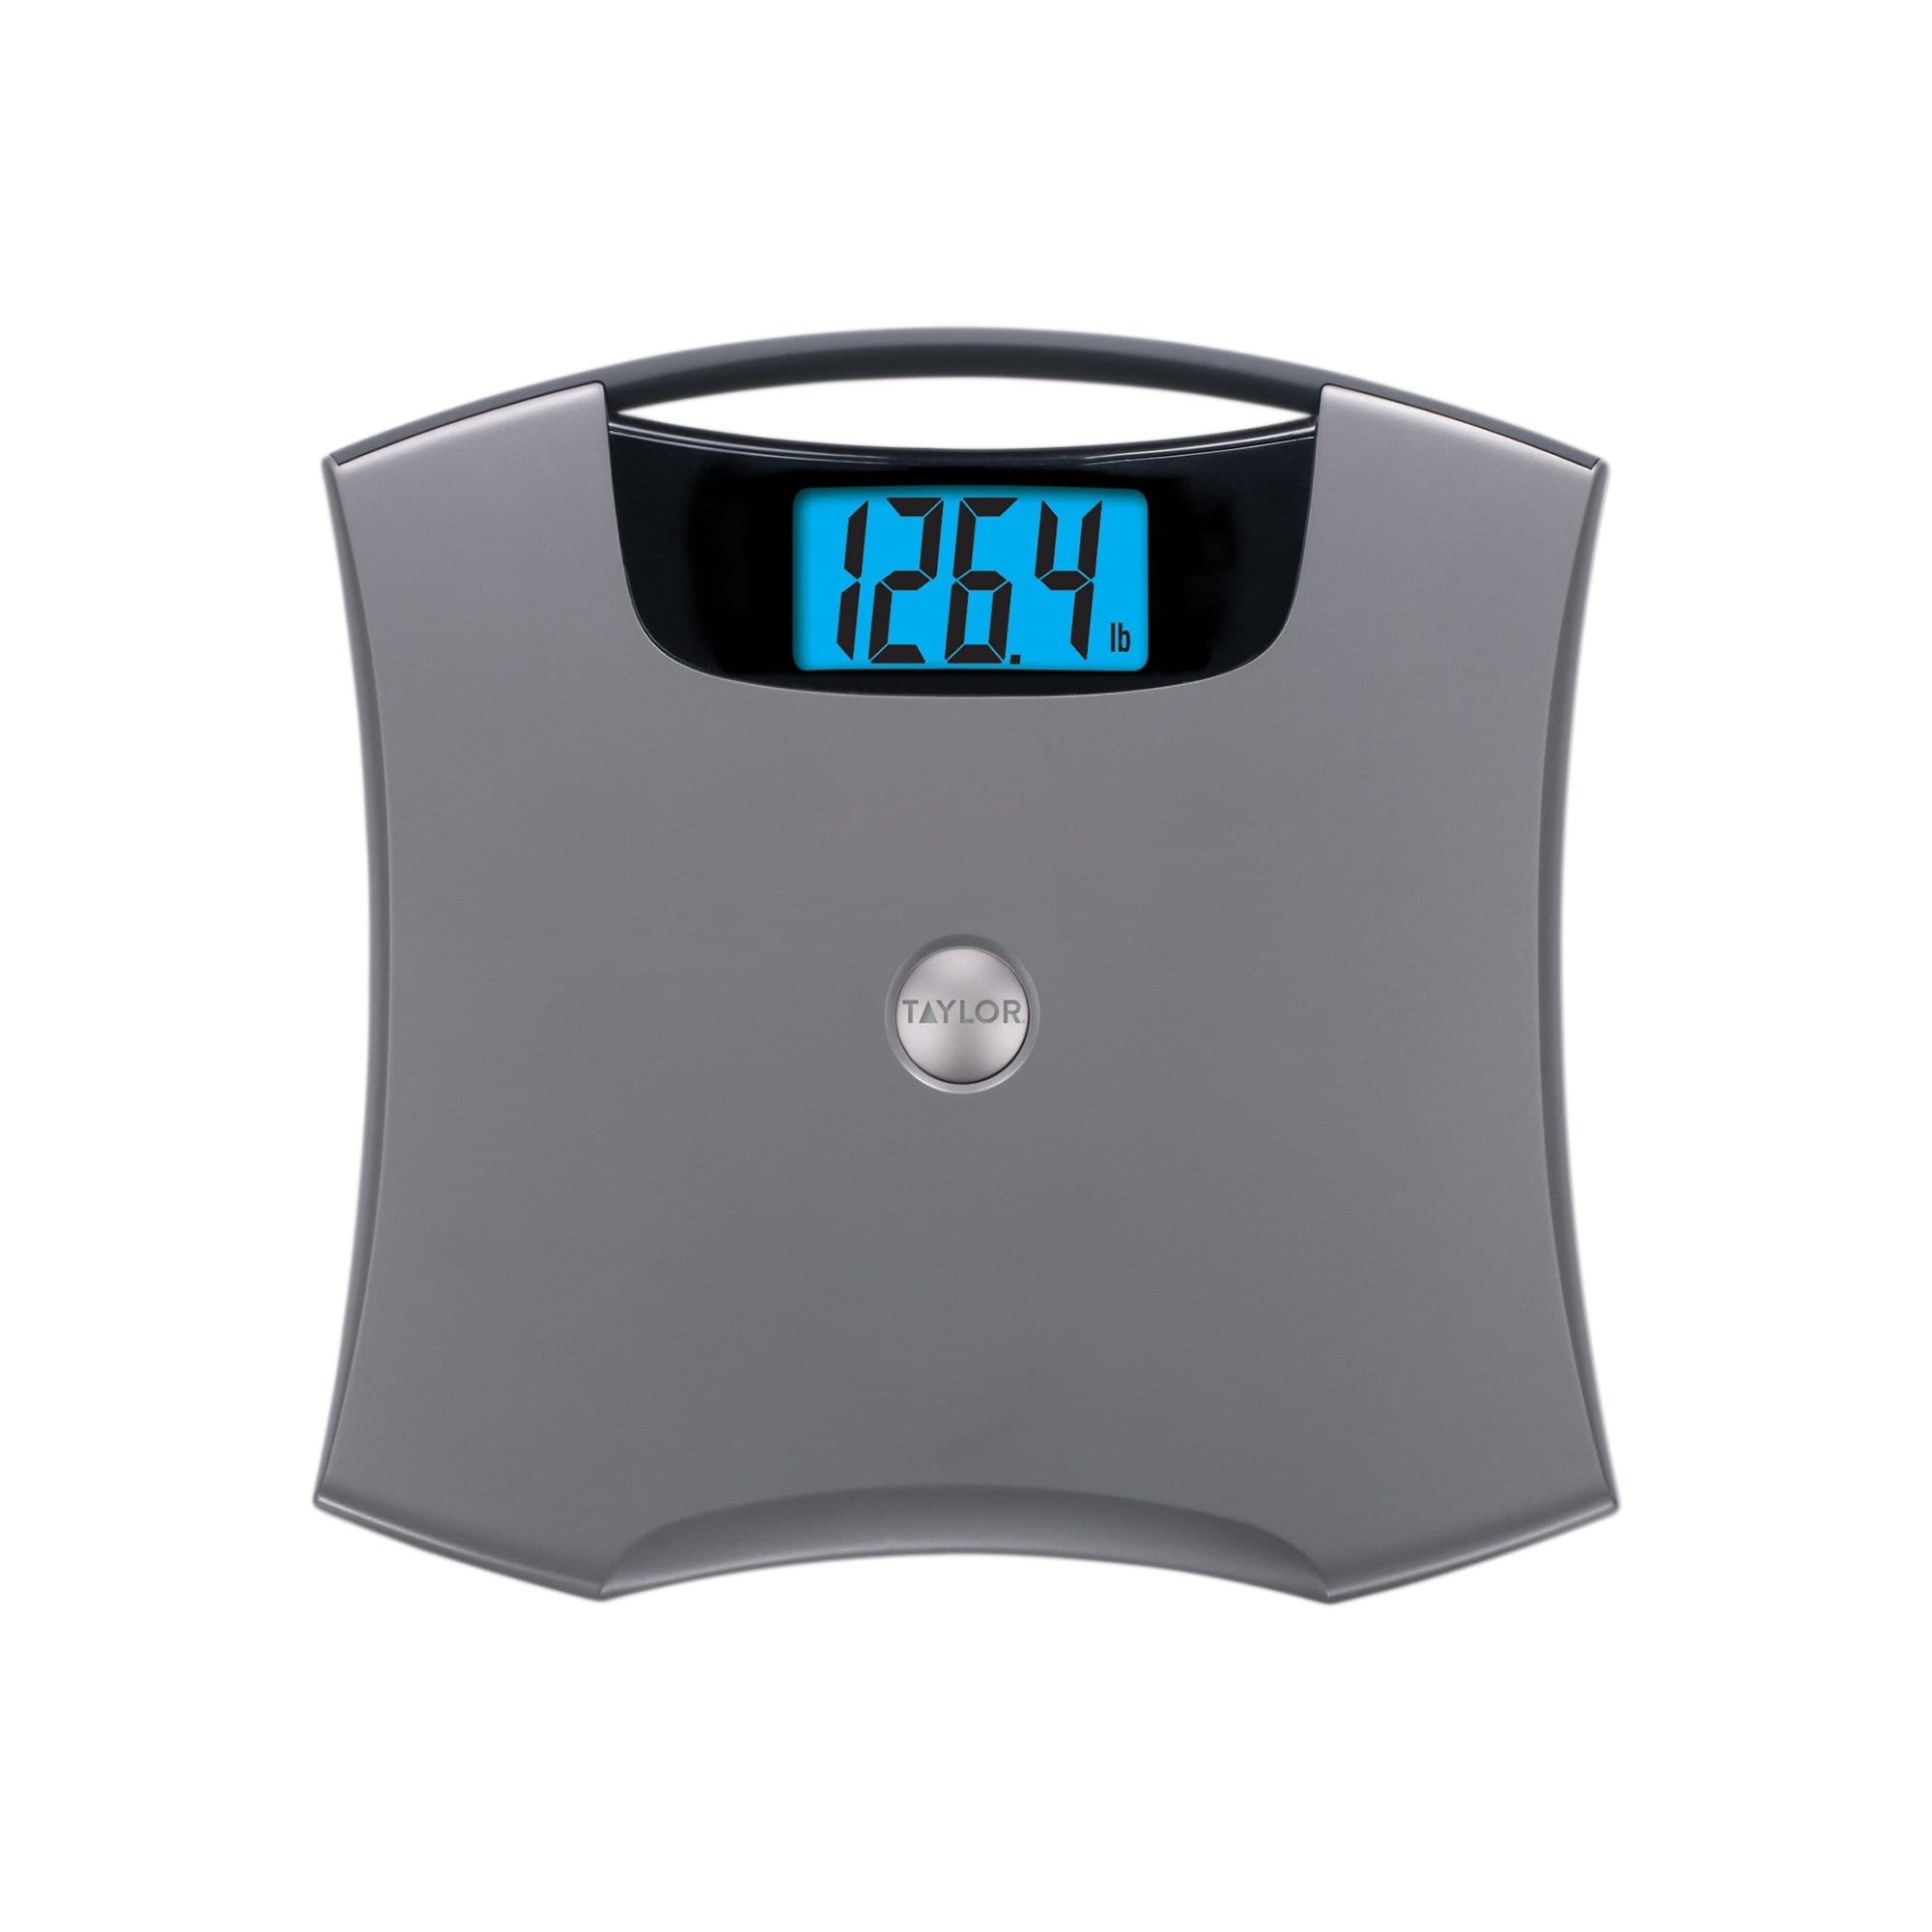 Extra-Wide Talking Scale